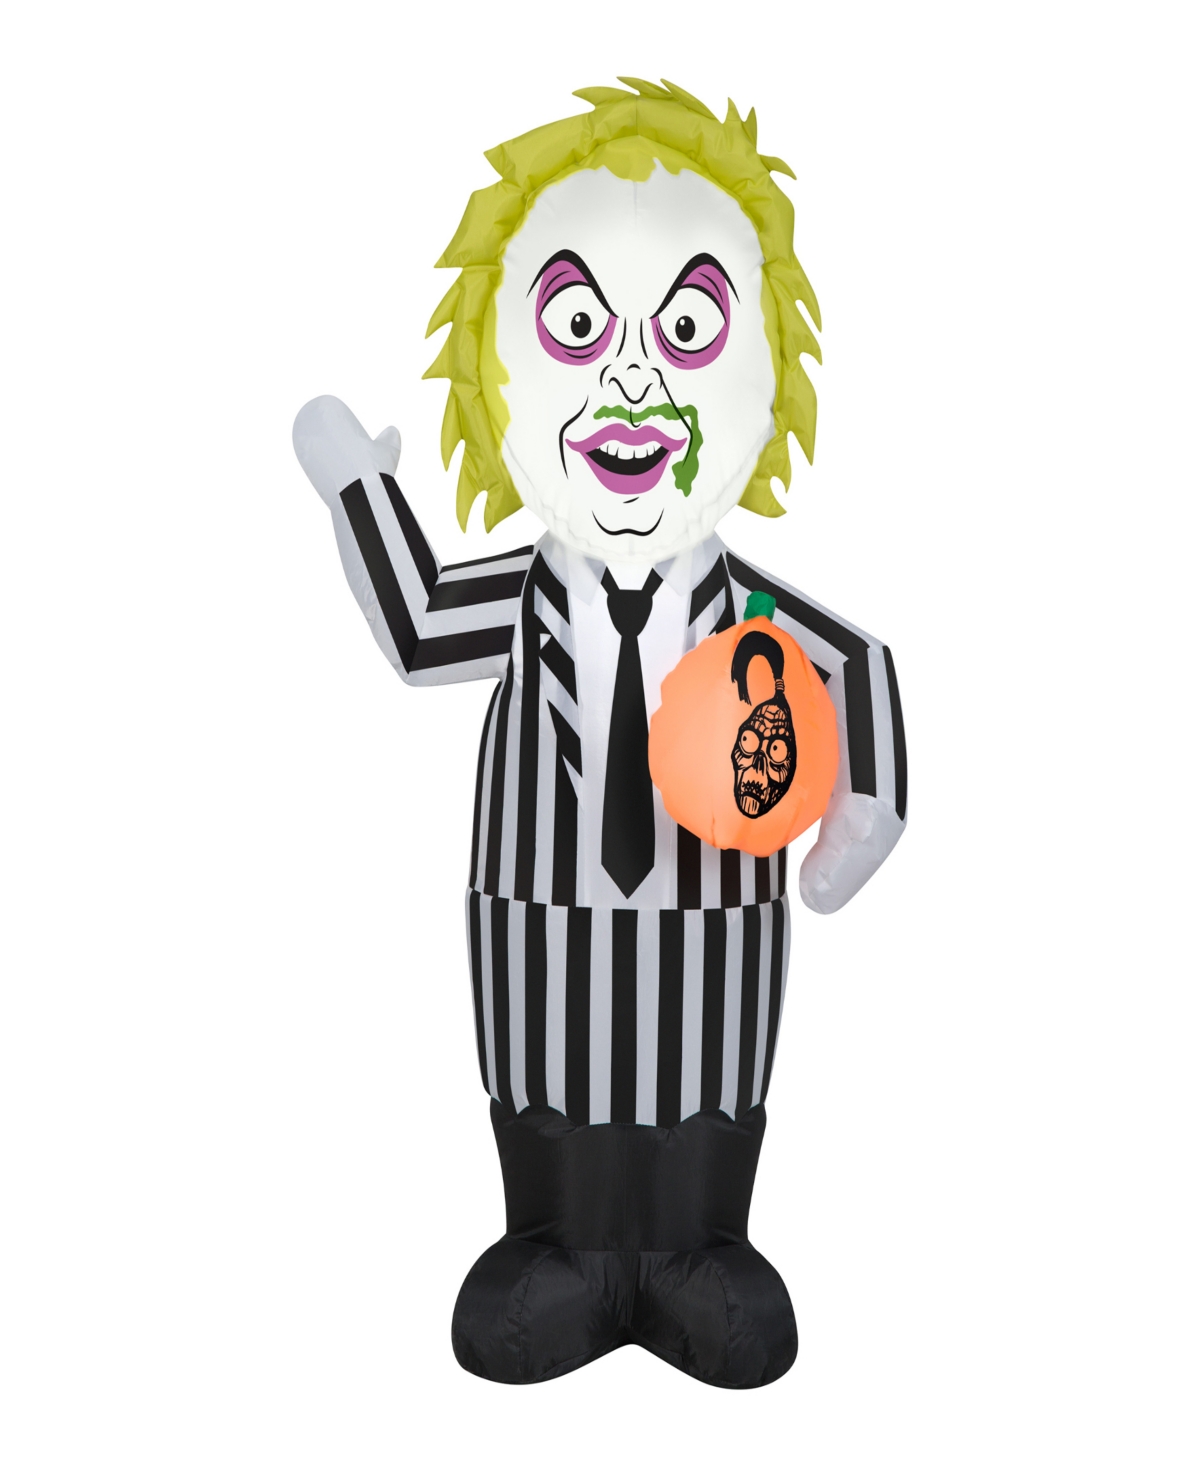 42" Inflatable Decoration, Black, Beetlejuice Character, Self Inflating, Plug In, Halloween Collection - Black